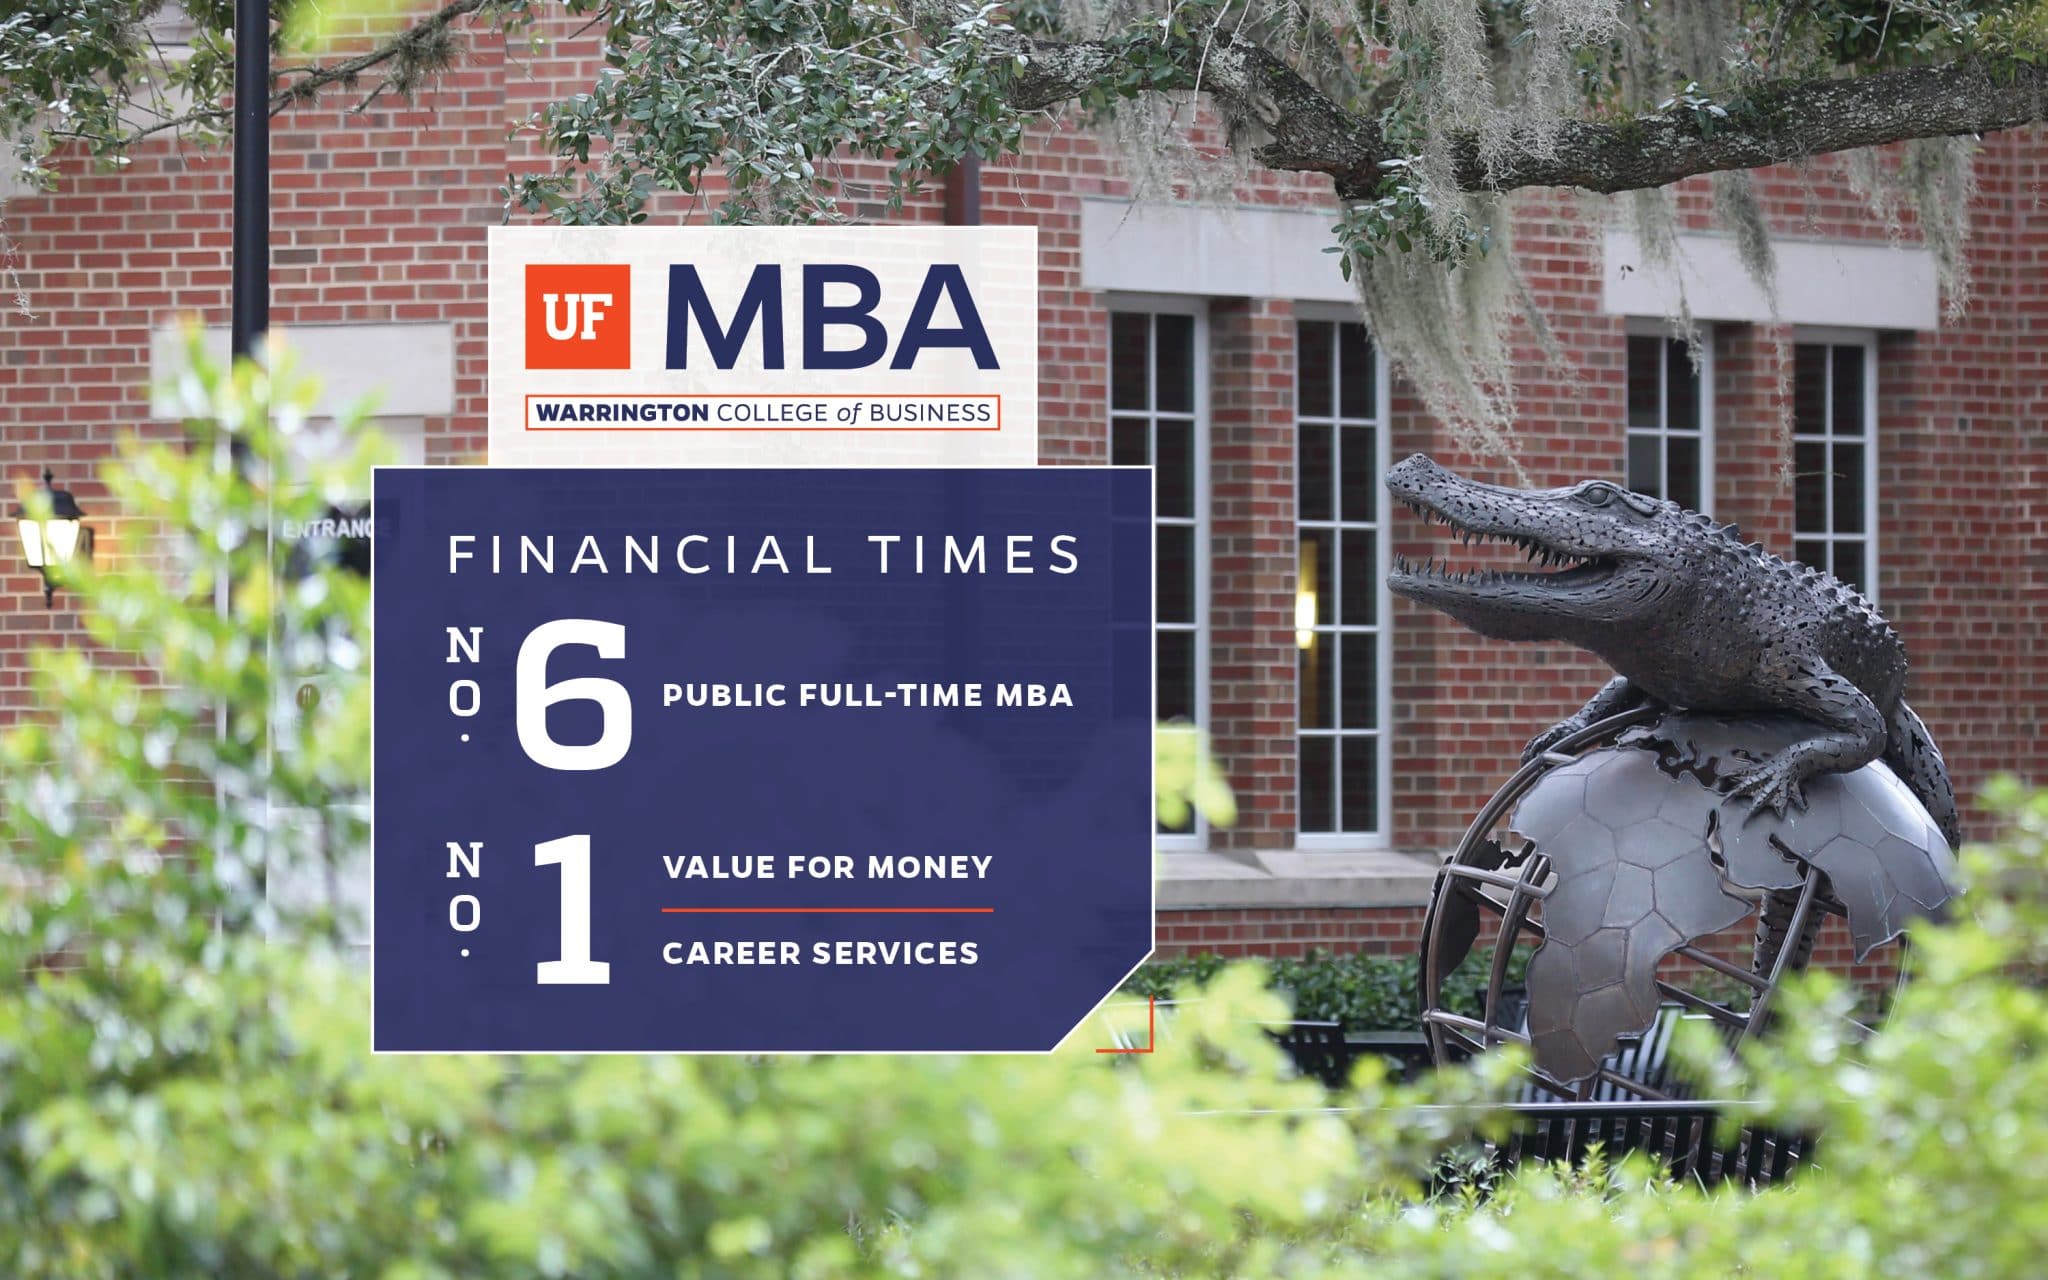 Financial Times UF MBA No. 1 in value for money, career services